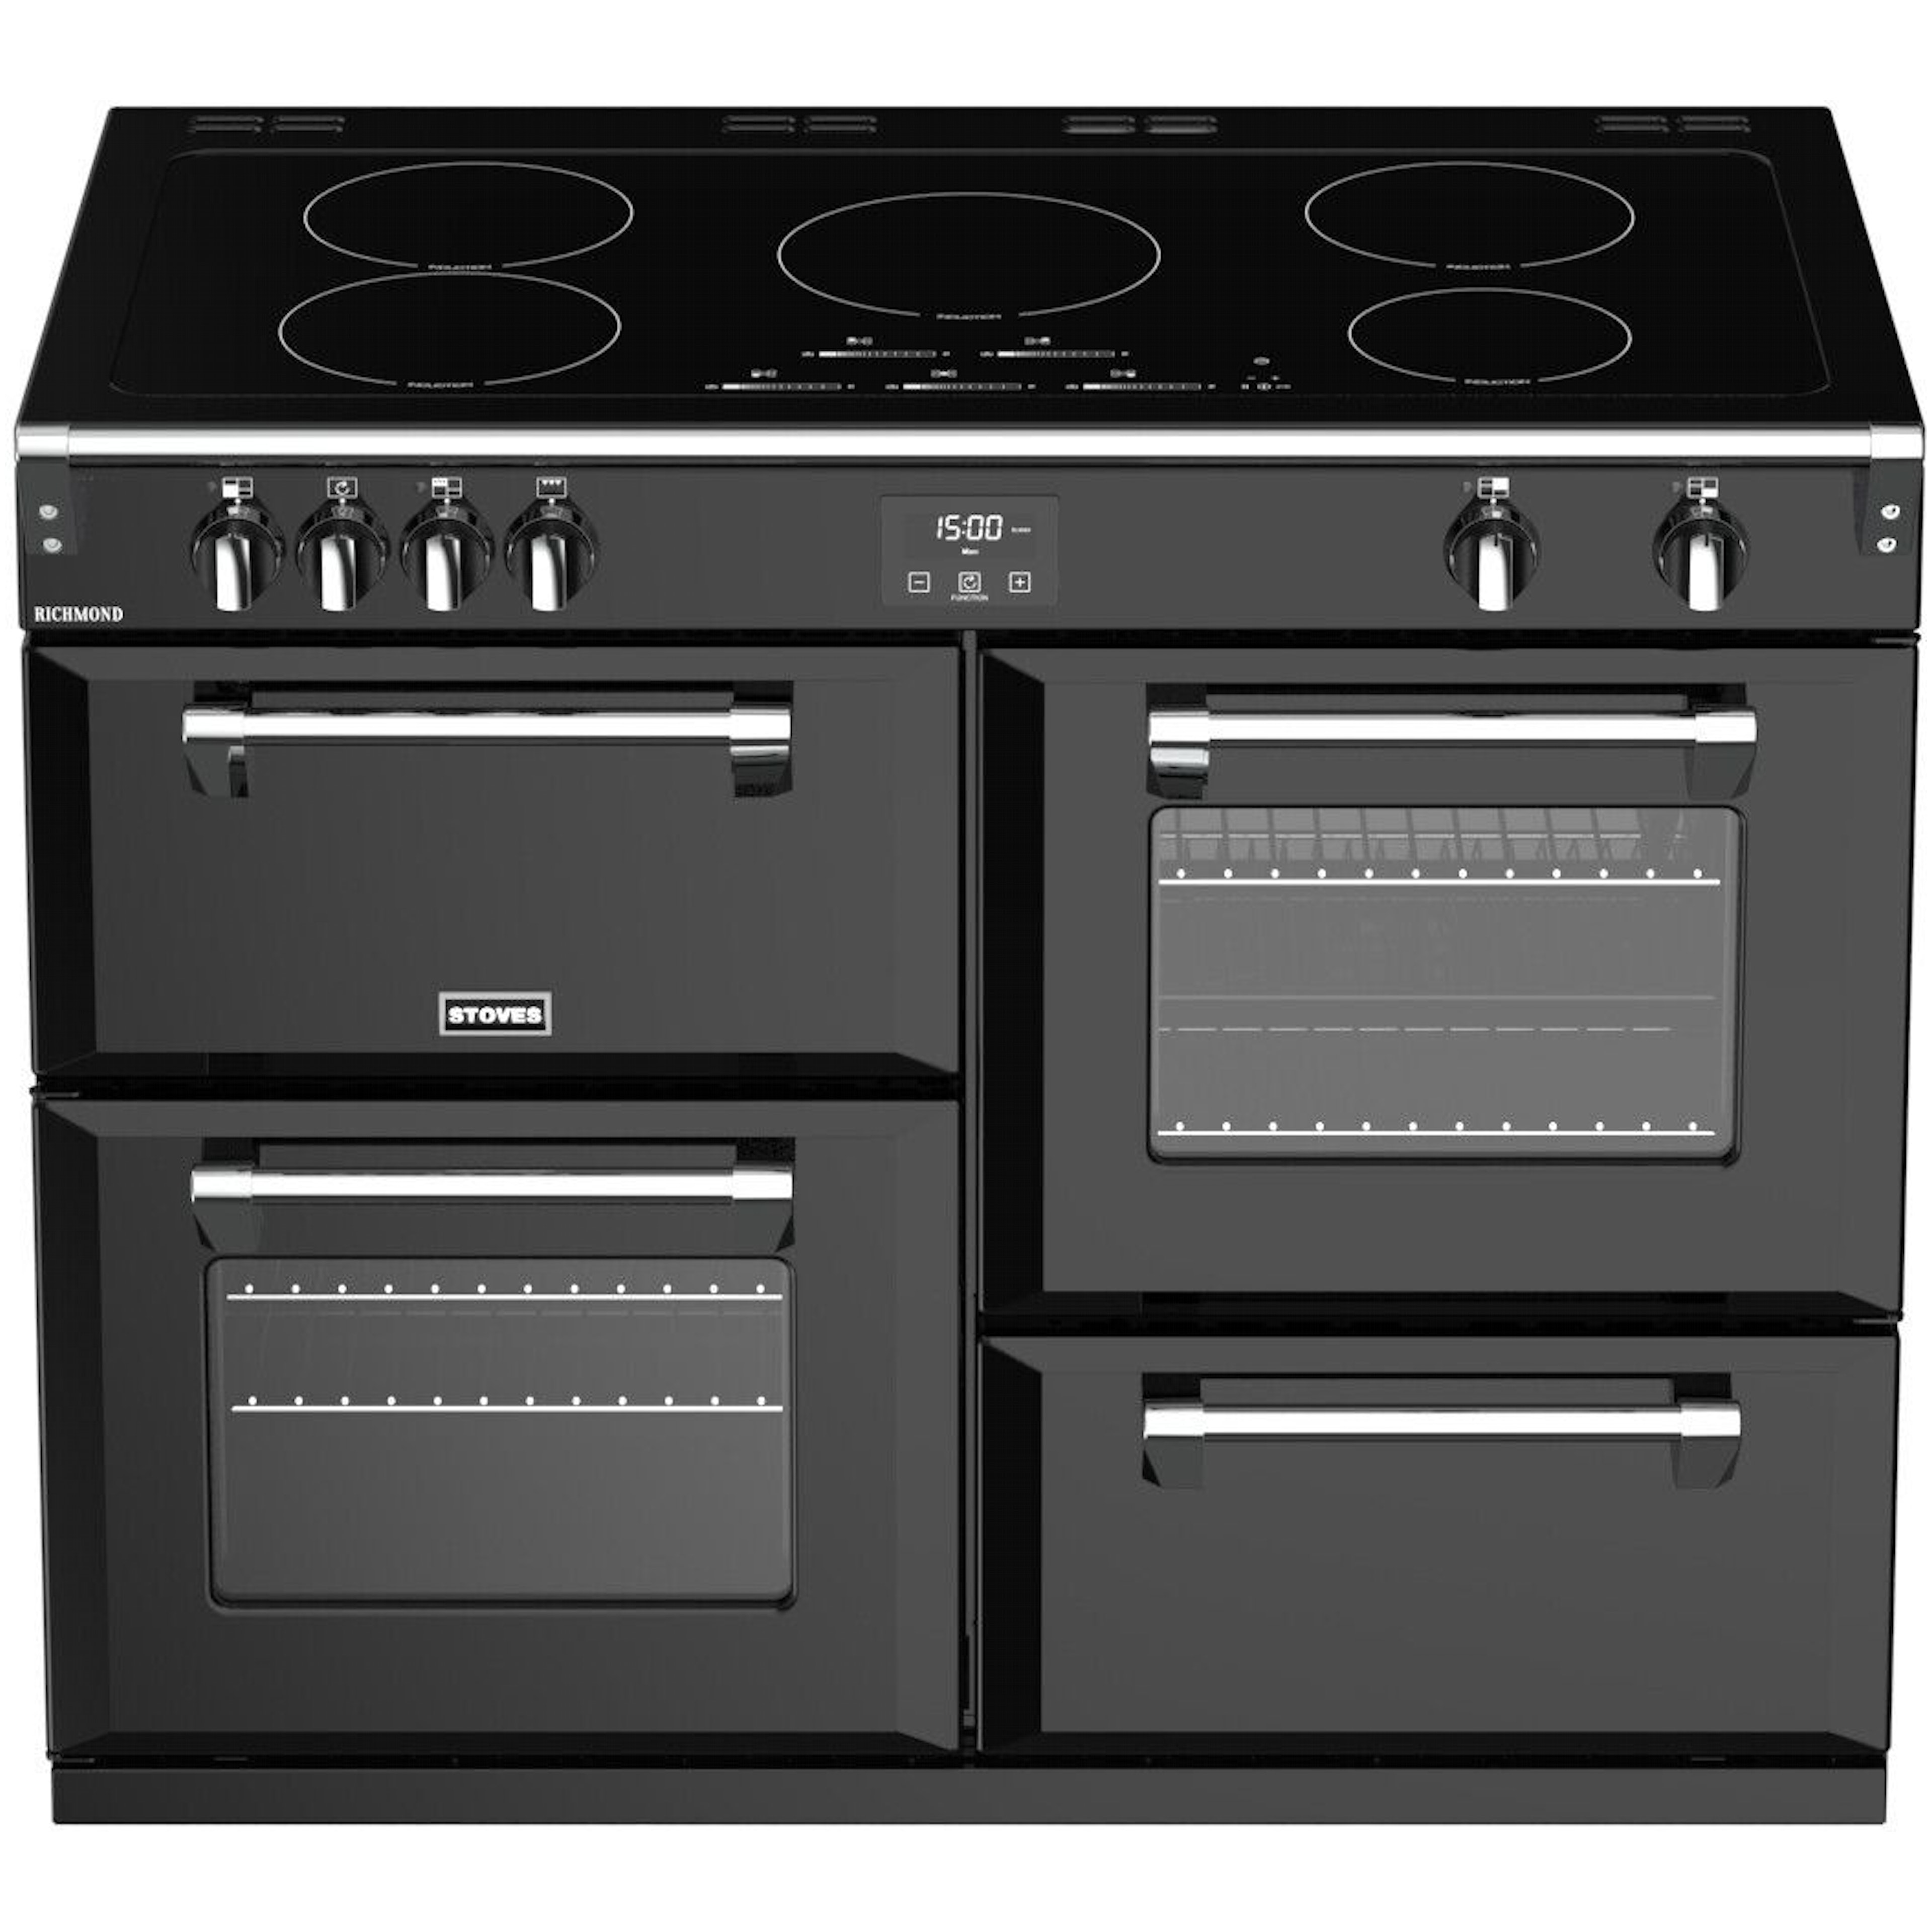 Stoves fornuis ST444475 afbeelding 3